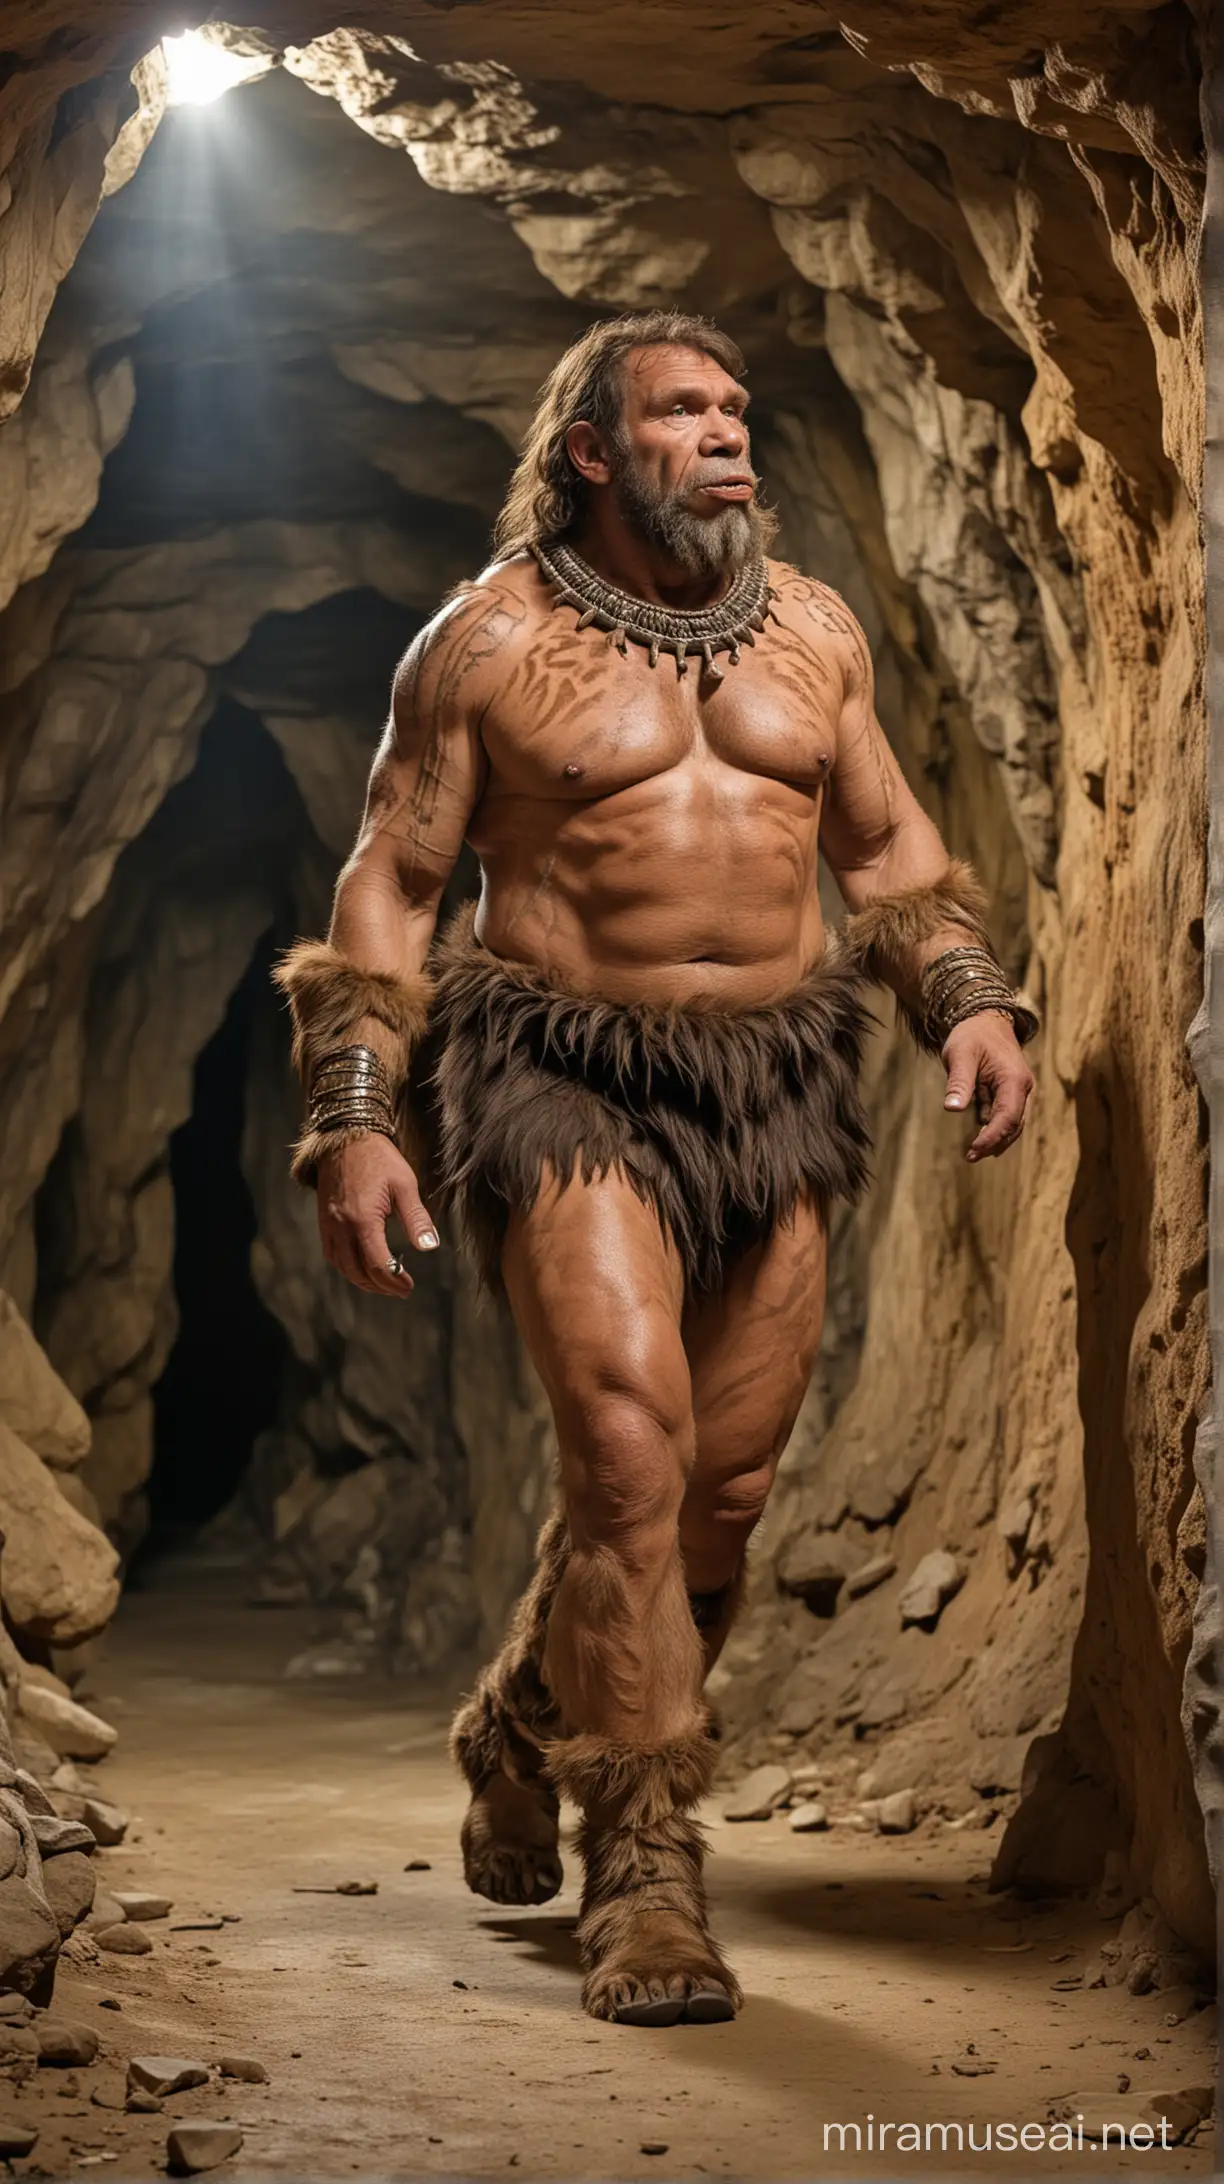 A Neanderthal man on a catwalk in a cave. He wears a bear and rhinoceros skin suit and has a cigarette on his lips